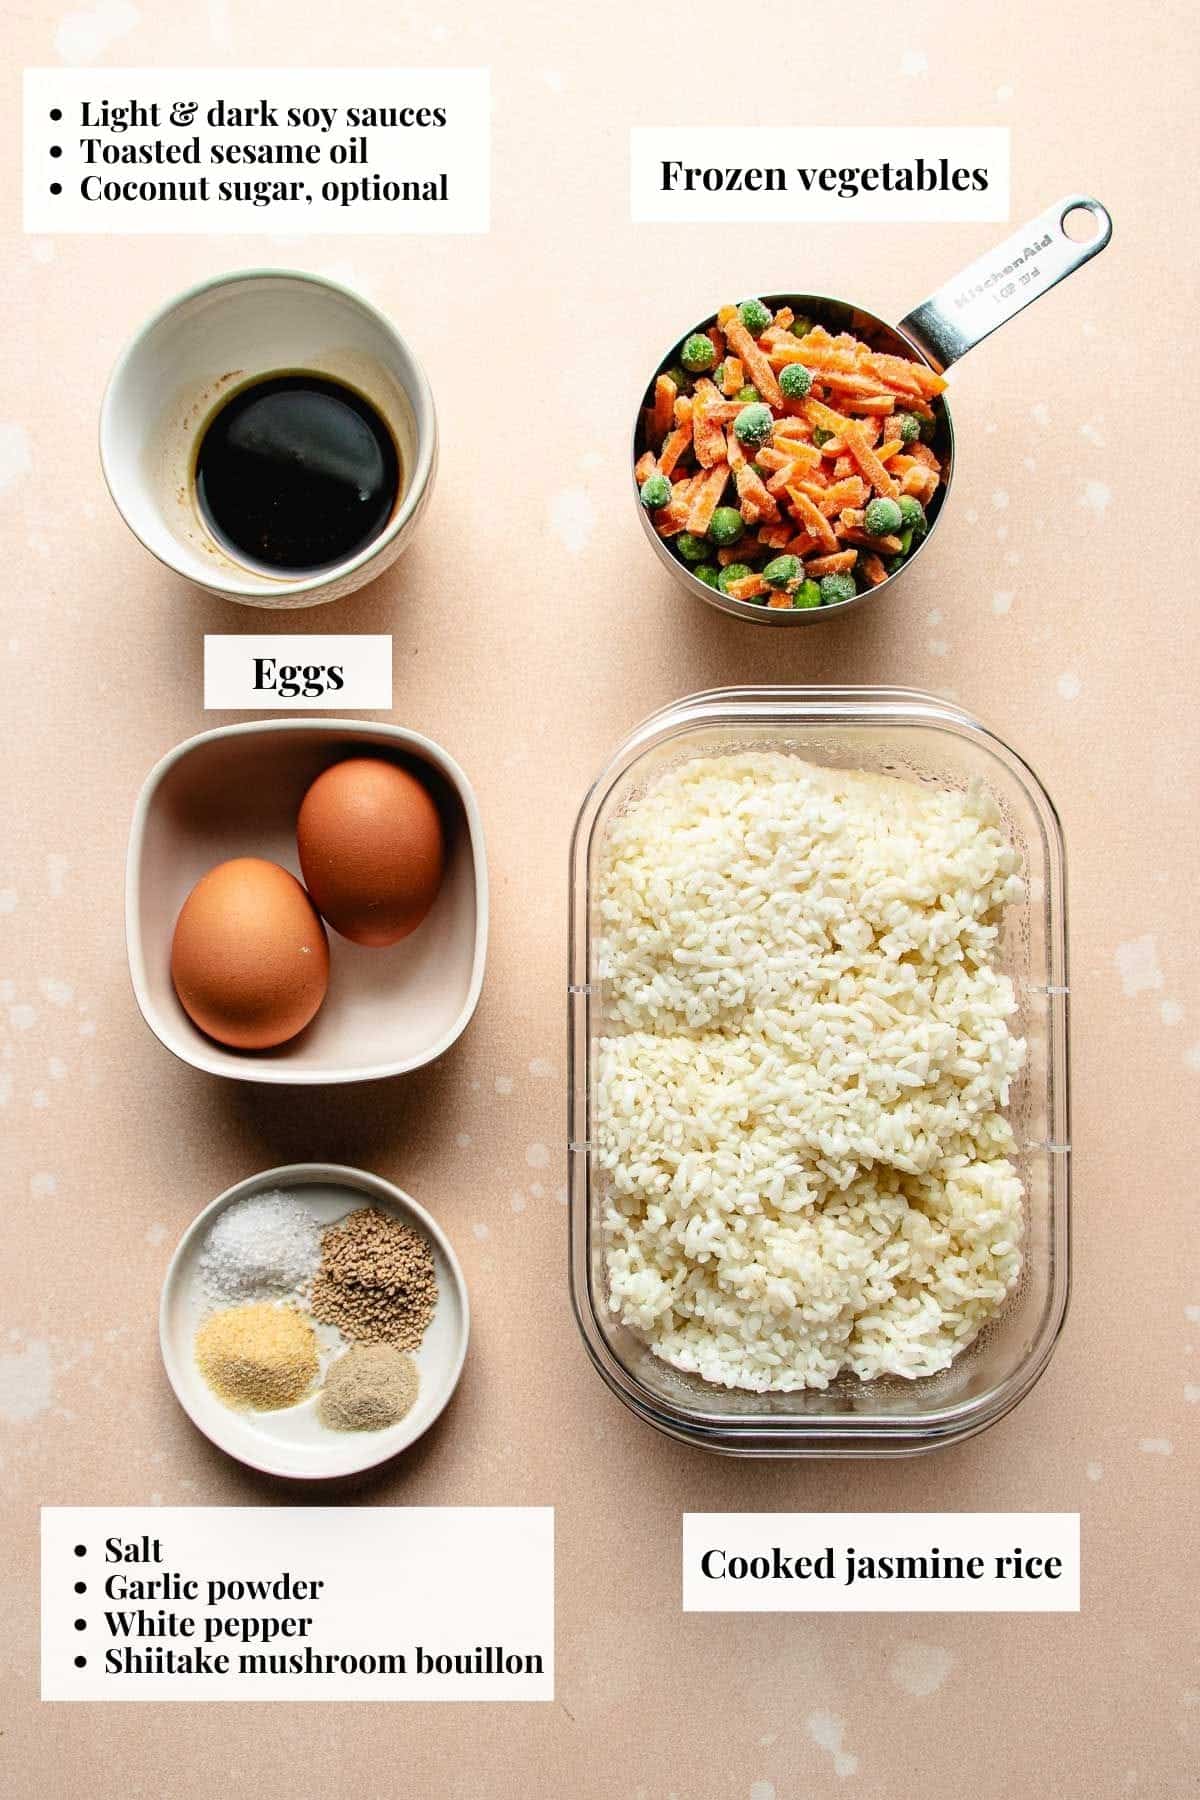 Photo shows ingredients needed to make Panda copycat fried rice dish.